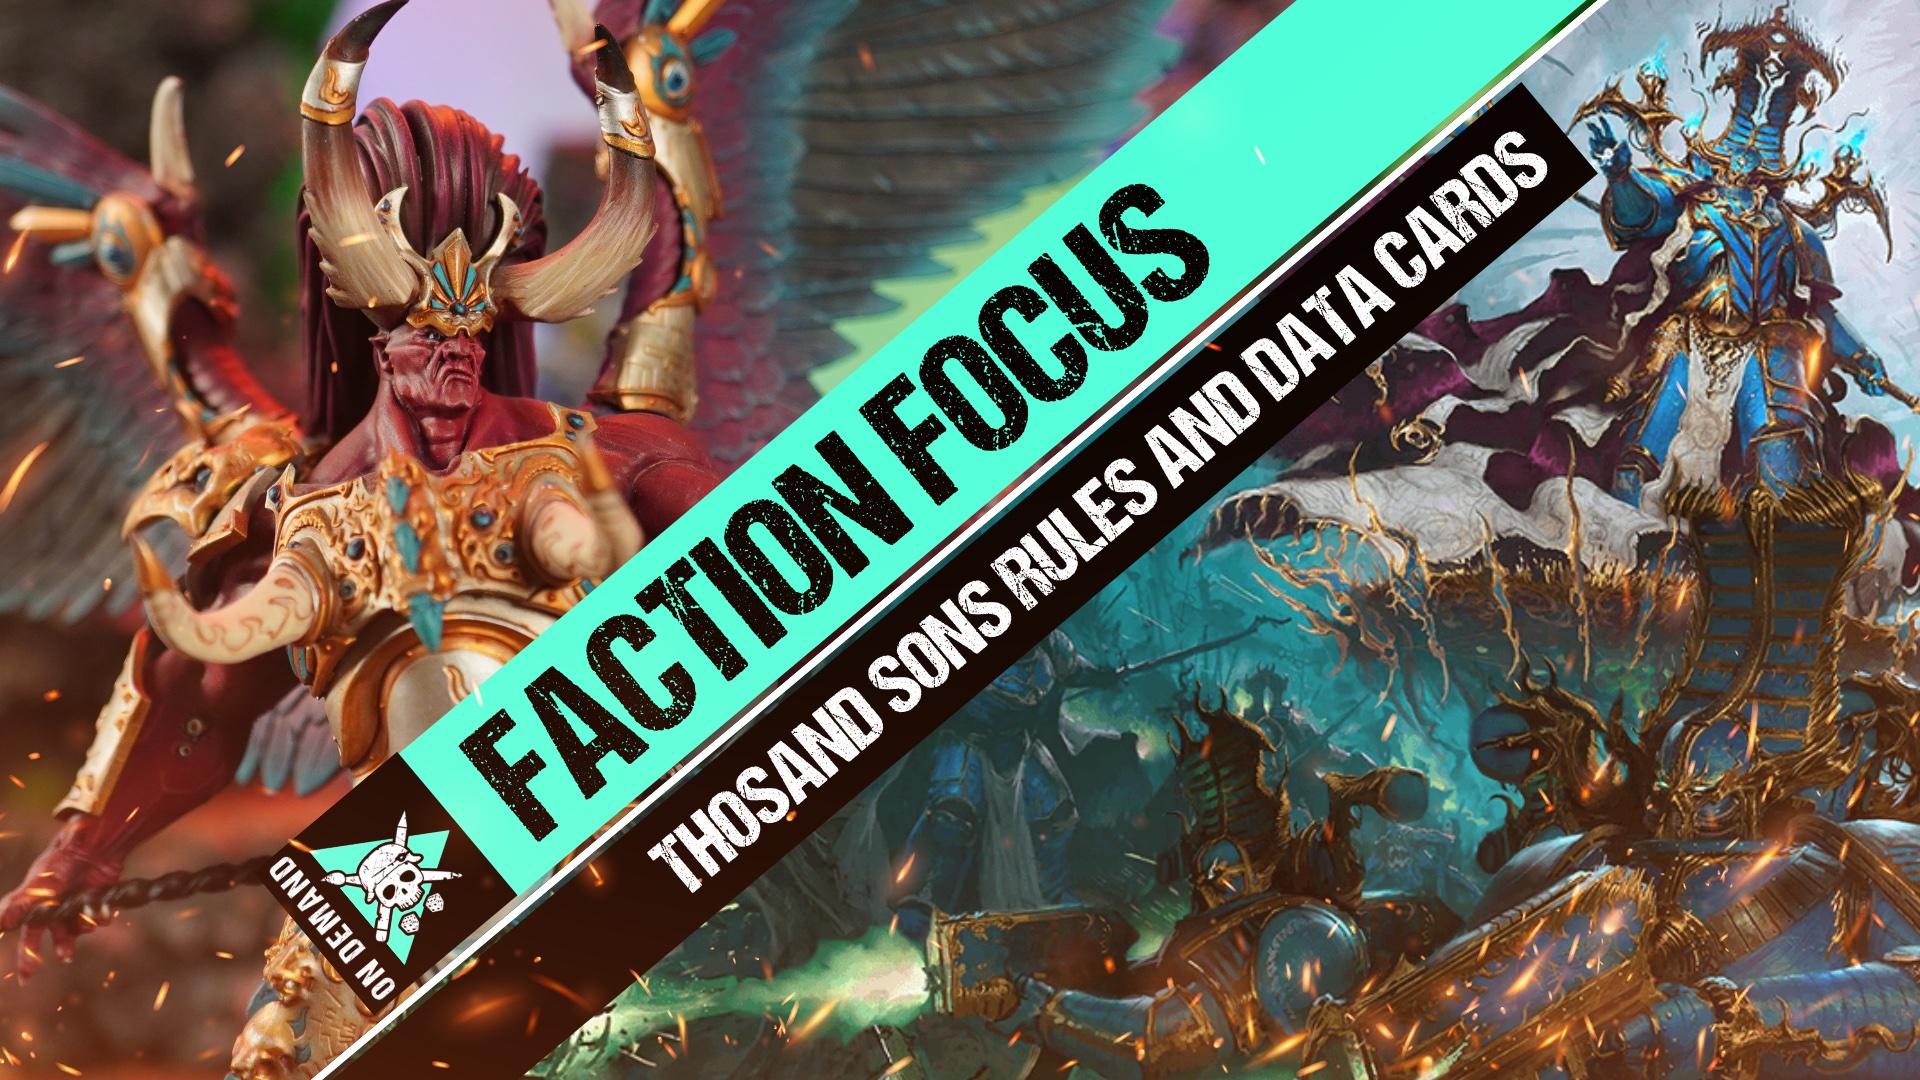 Sorcery and Strategy Collide as Warhammer 40,000: Tacticus Welcomes the  Thousand Sons